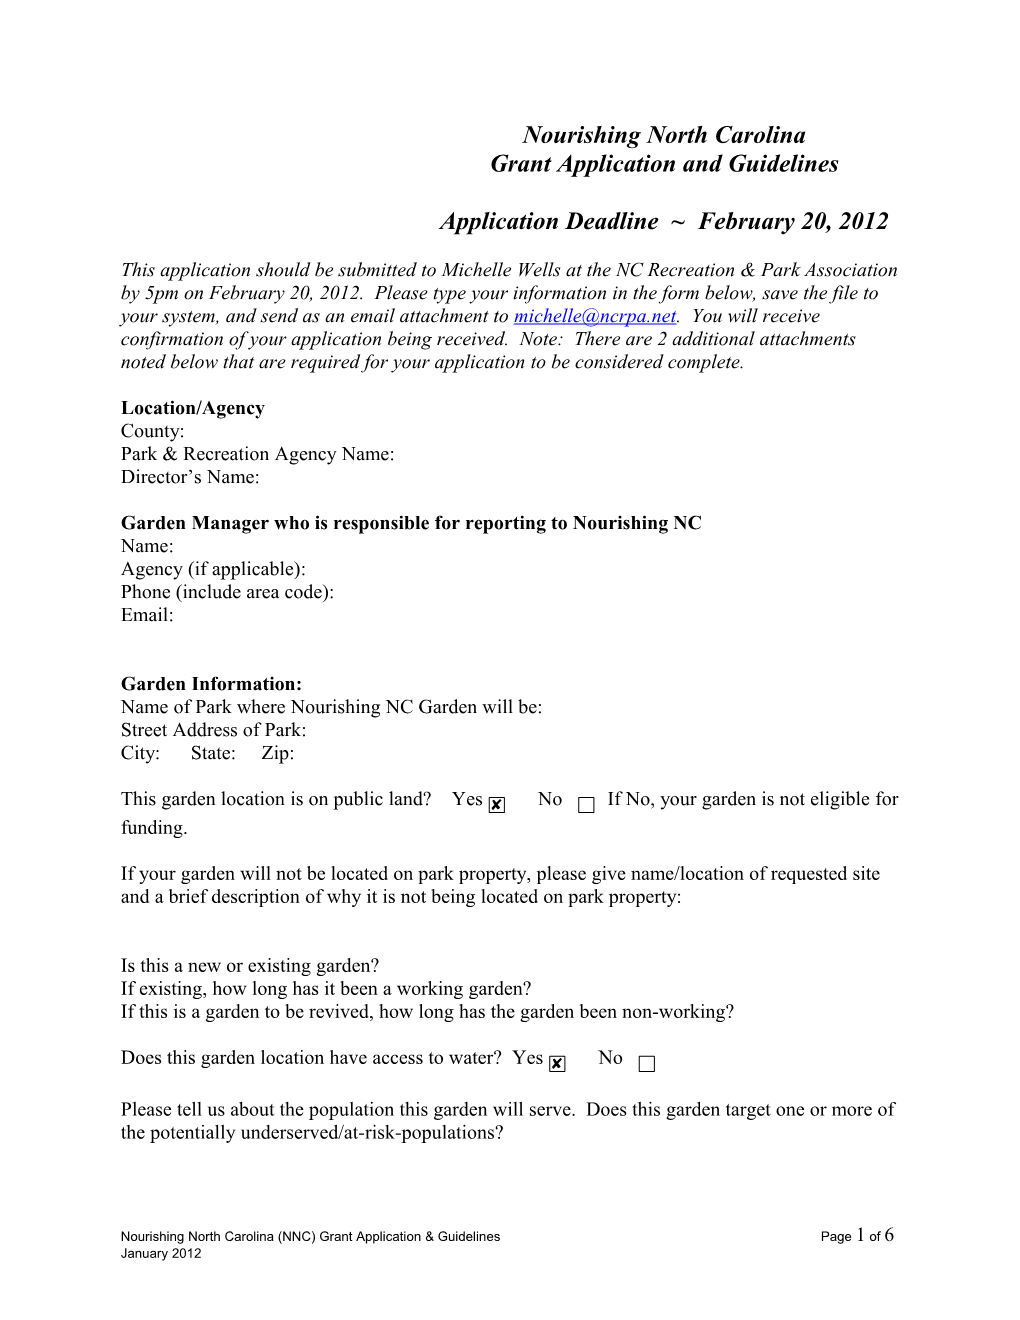 Nourishing NC Grant Application and Guidelines s5